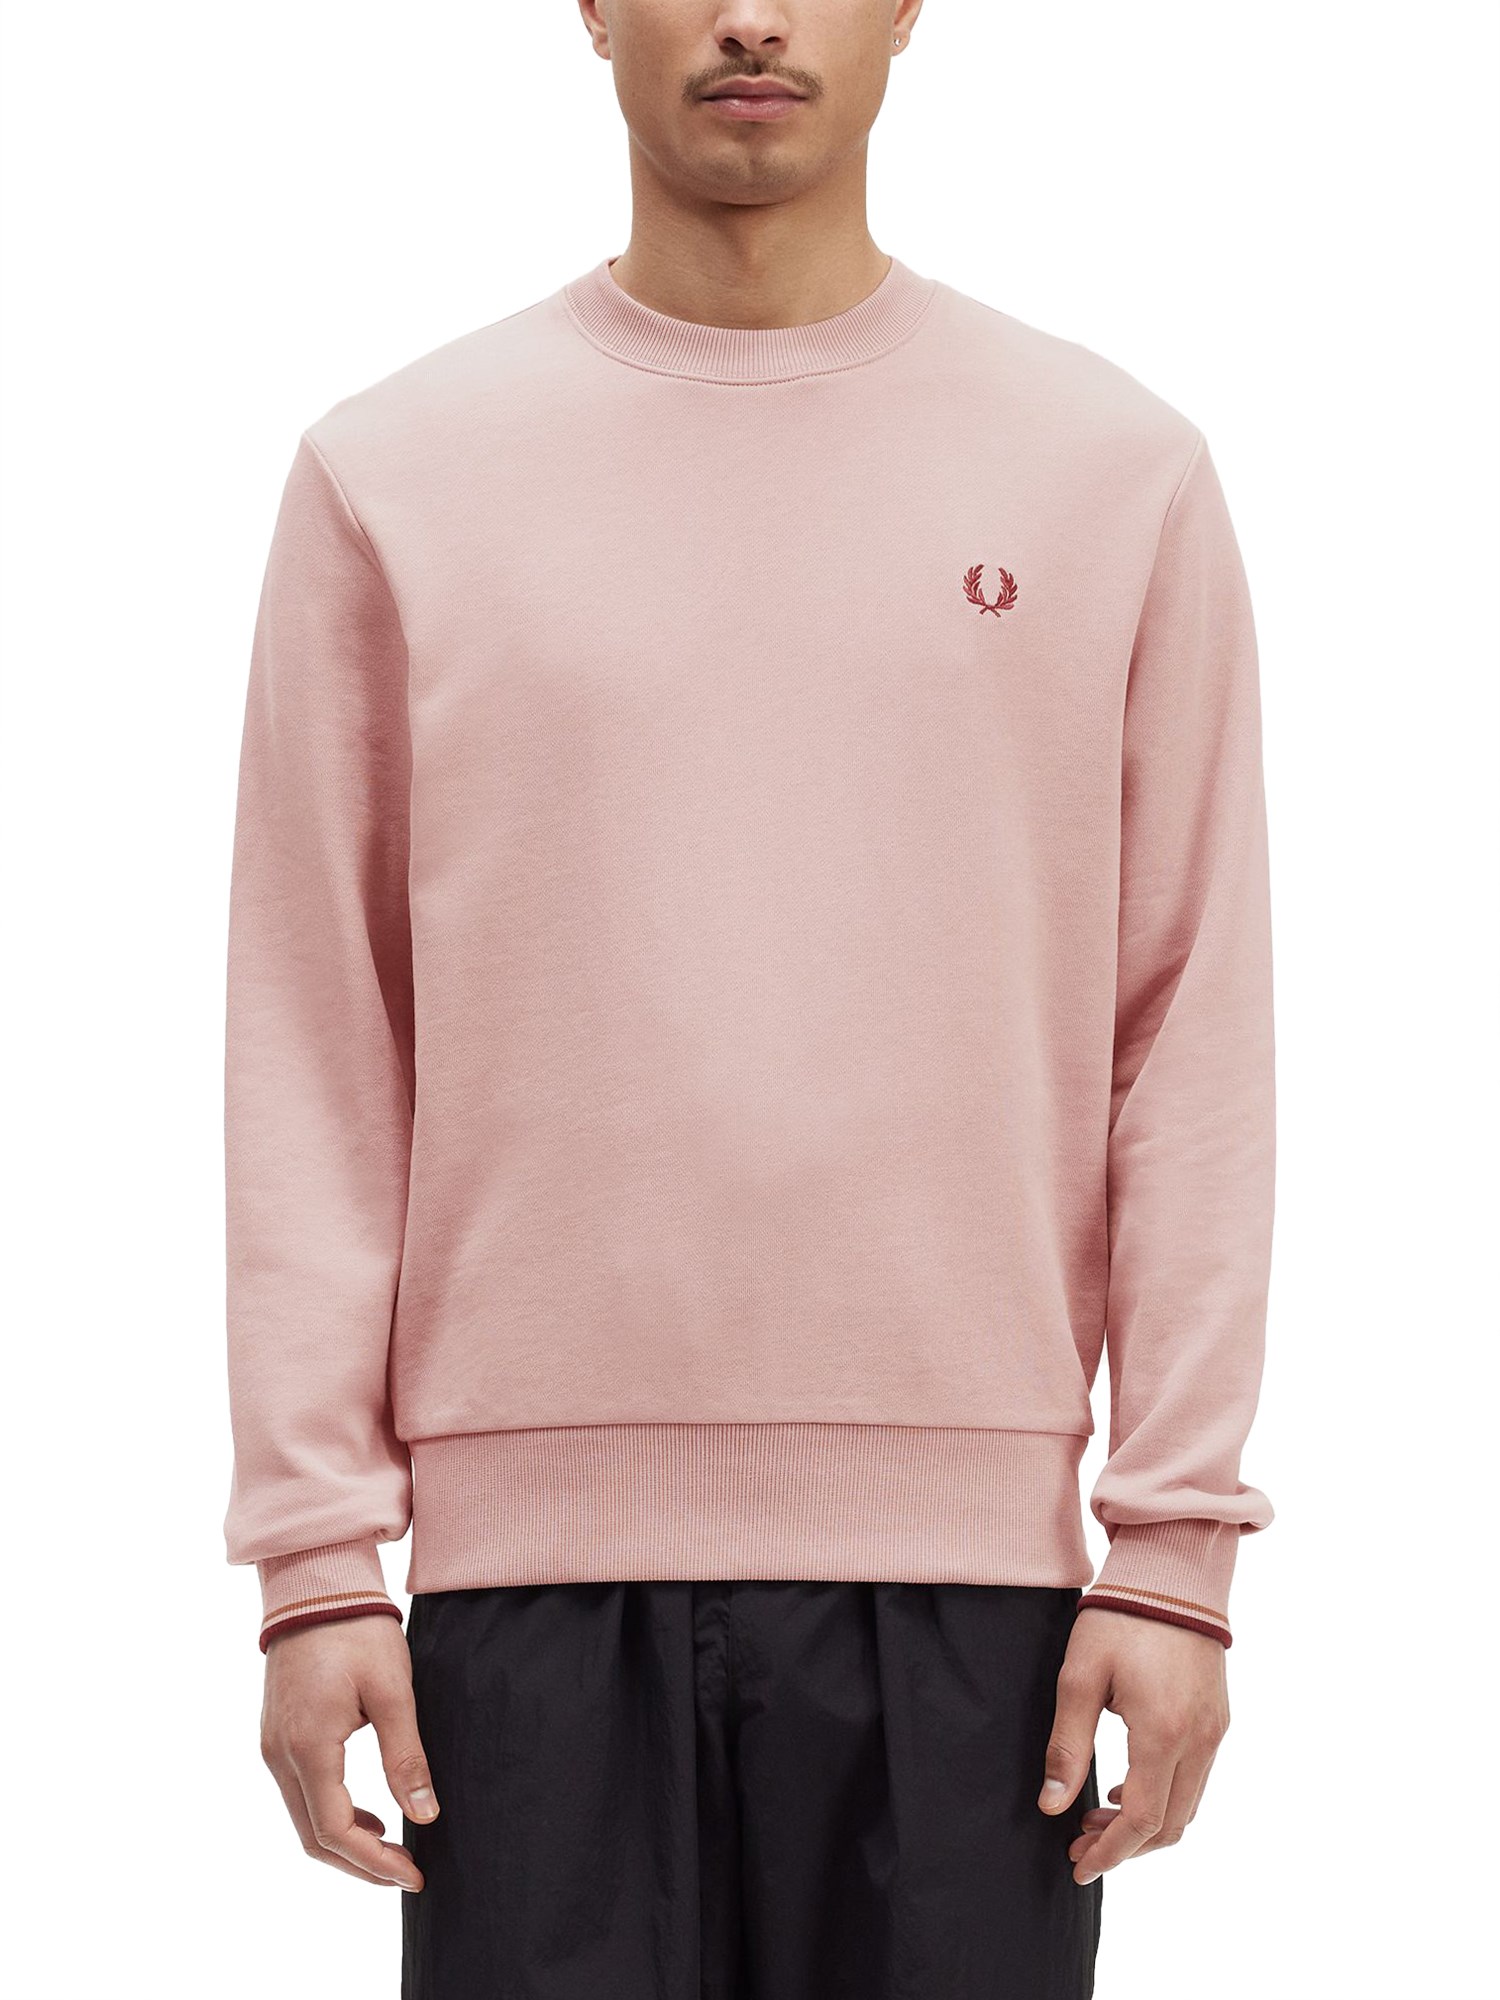 FRED PERRY SWEATSHIRT WITH LOGO